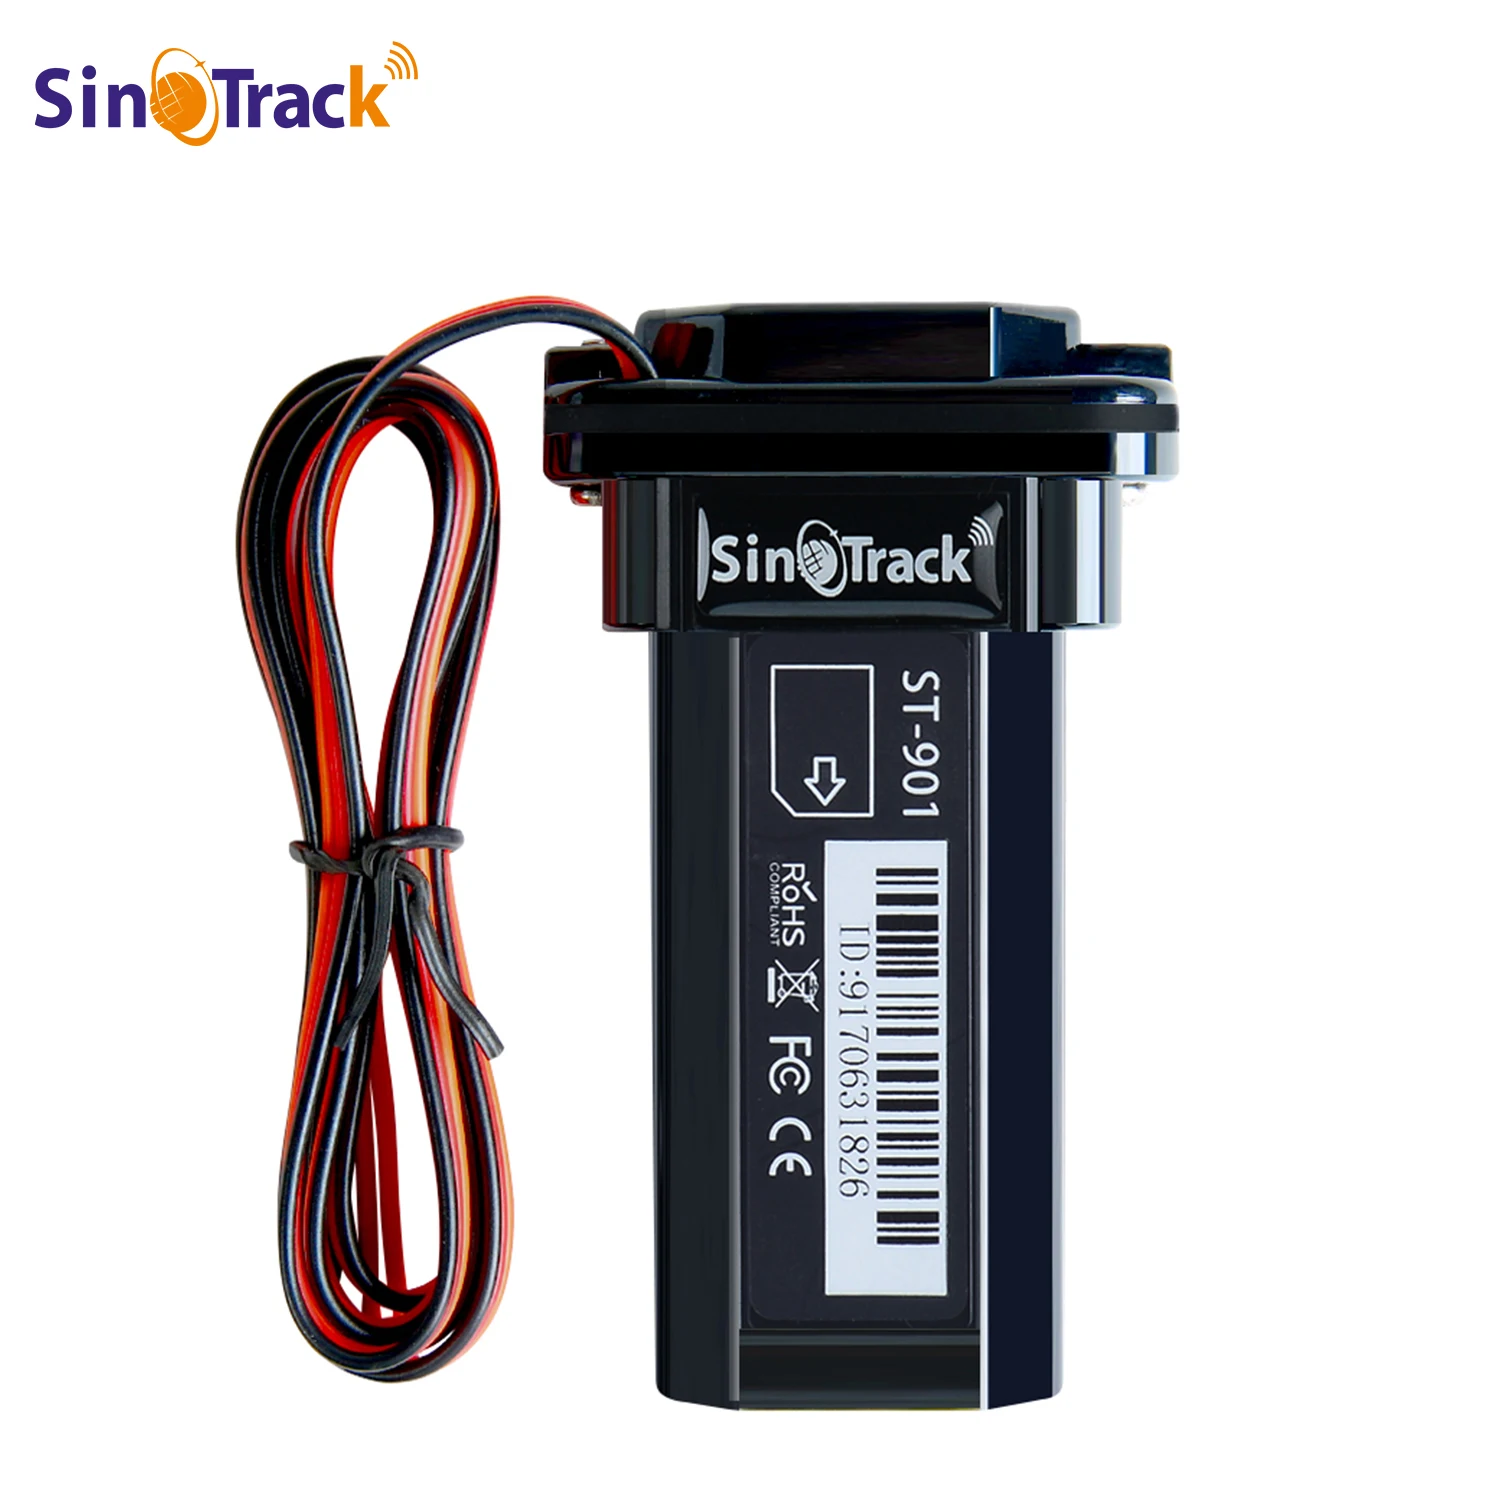 SinoTrack GPS Tracker ST-901 Vehicle Tracking Device Waterproof motorcycle Car - £23.35 GBP+